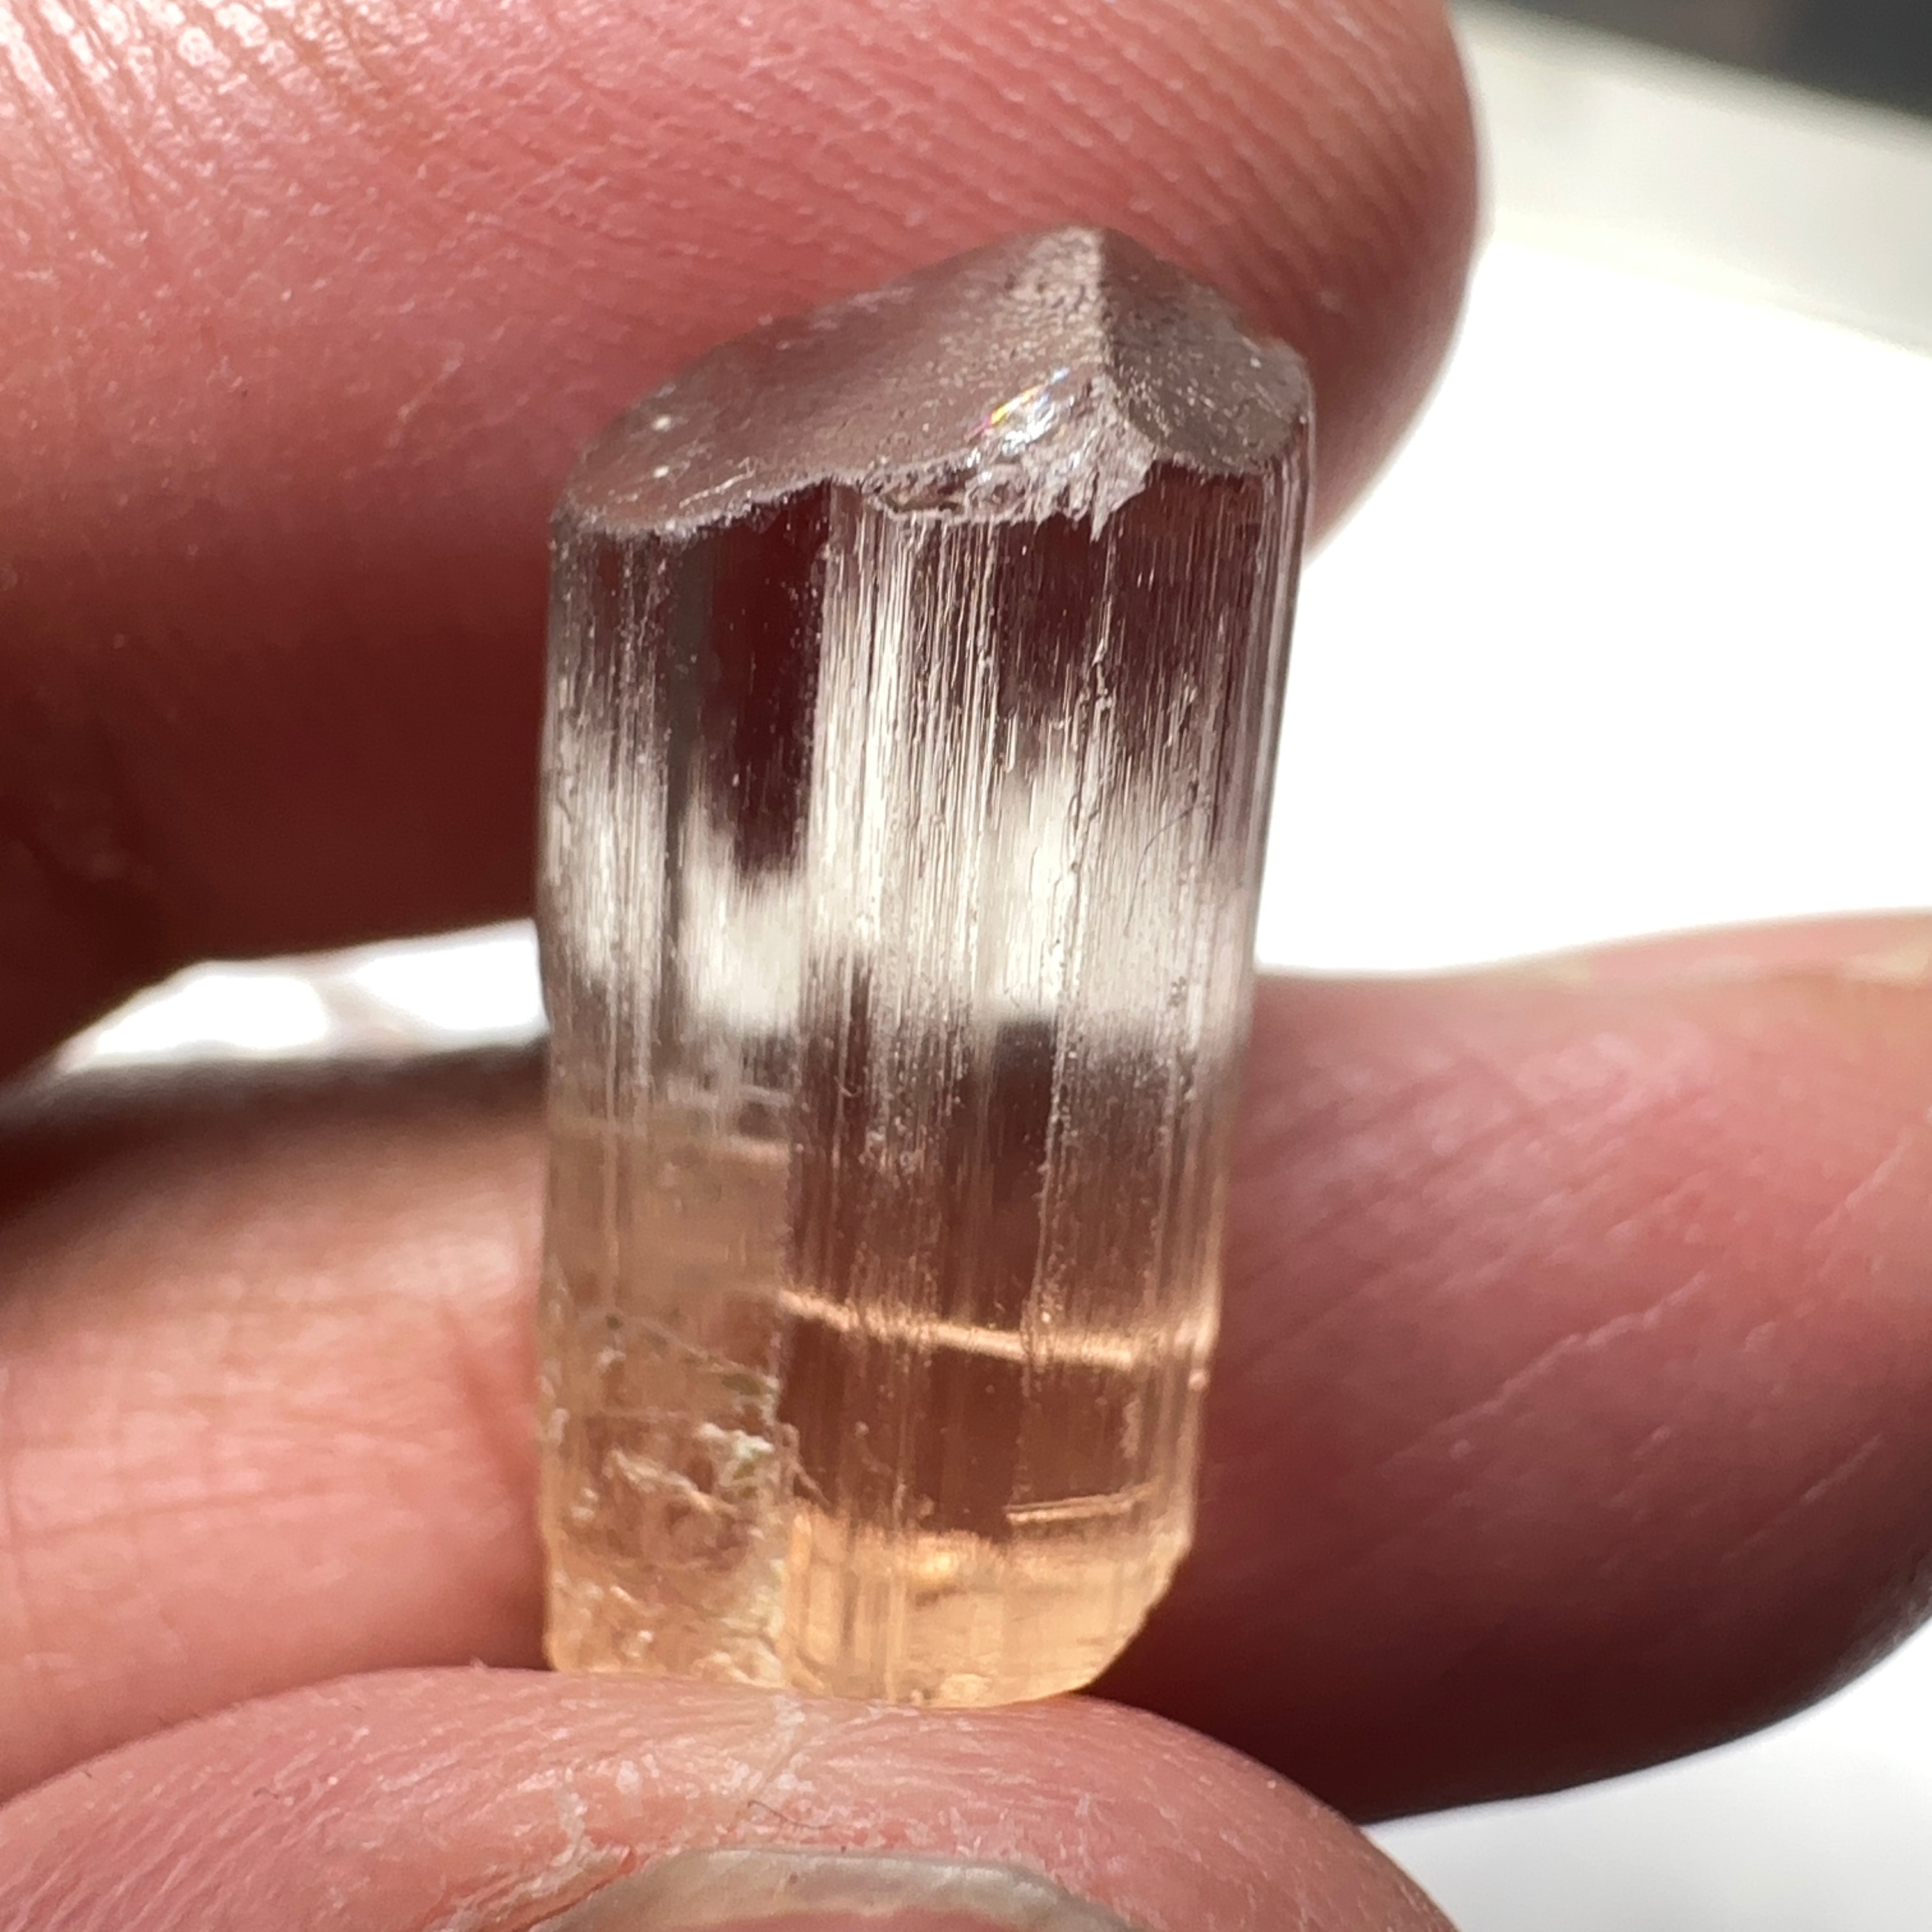 10.19ct Very Rare, Peach Pink Scapolite, Tanzania, Untreated Unheated, VVS-IF (flawless)